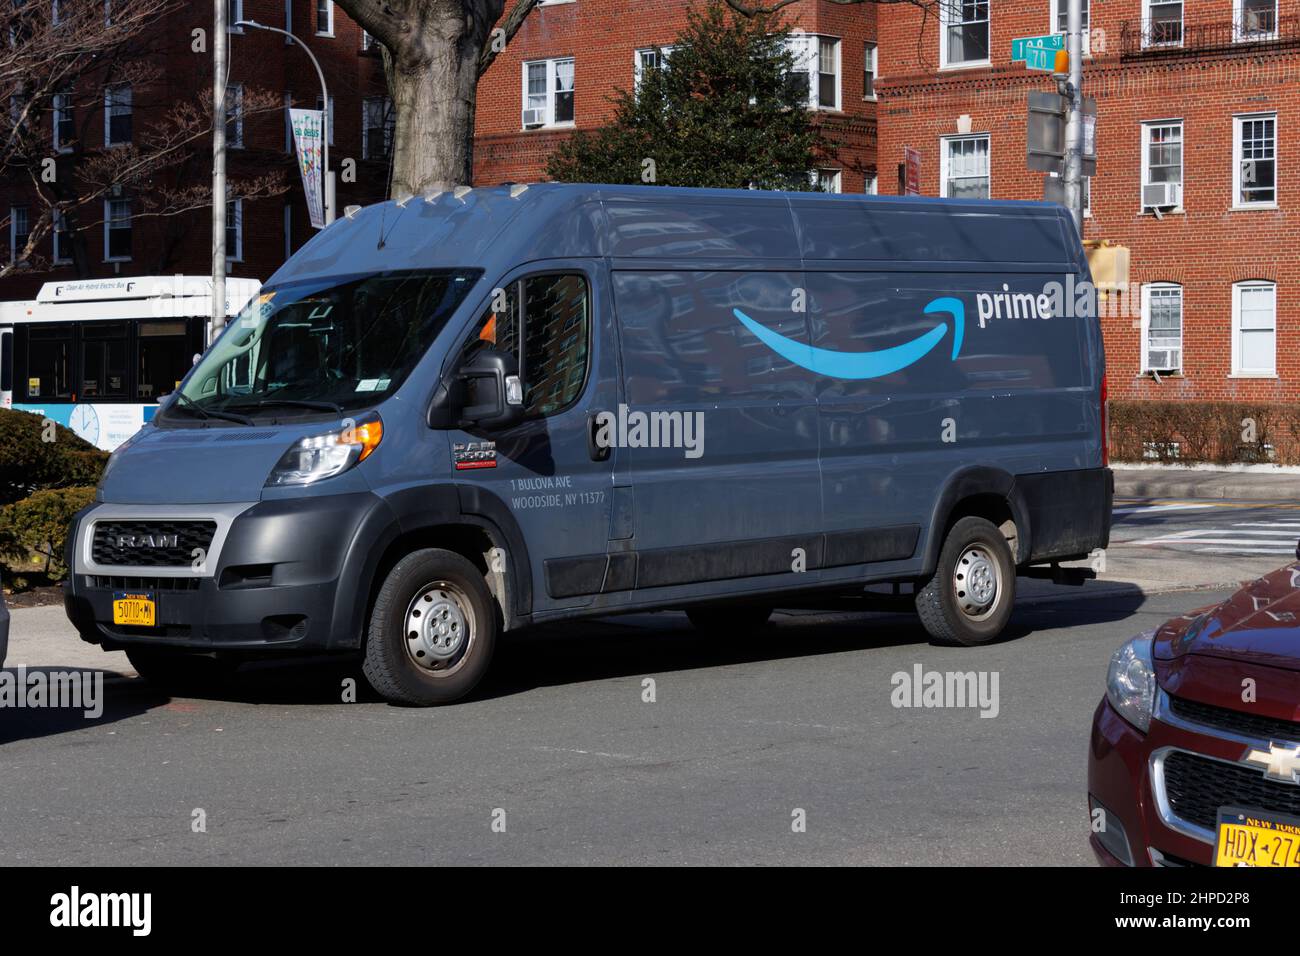 Amazon prime delivery van or truck parked on a street in Queens, New York Stock Photo